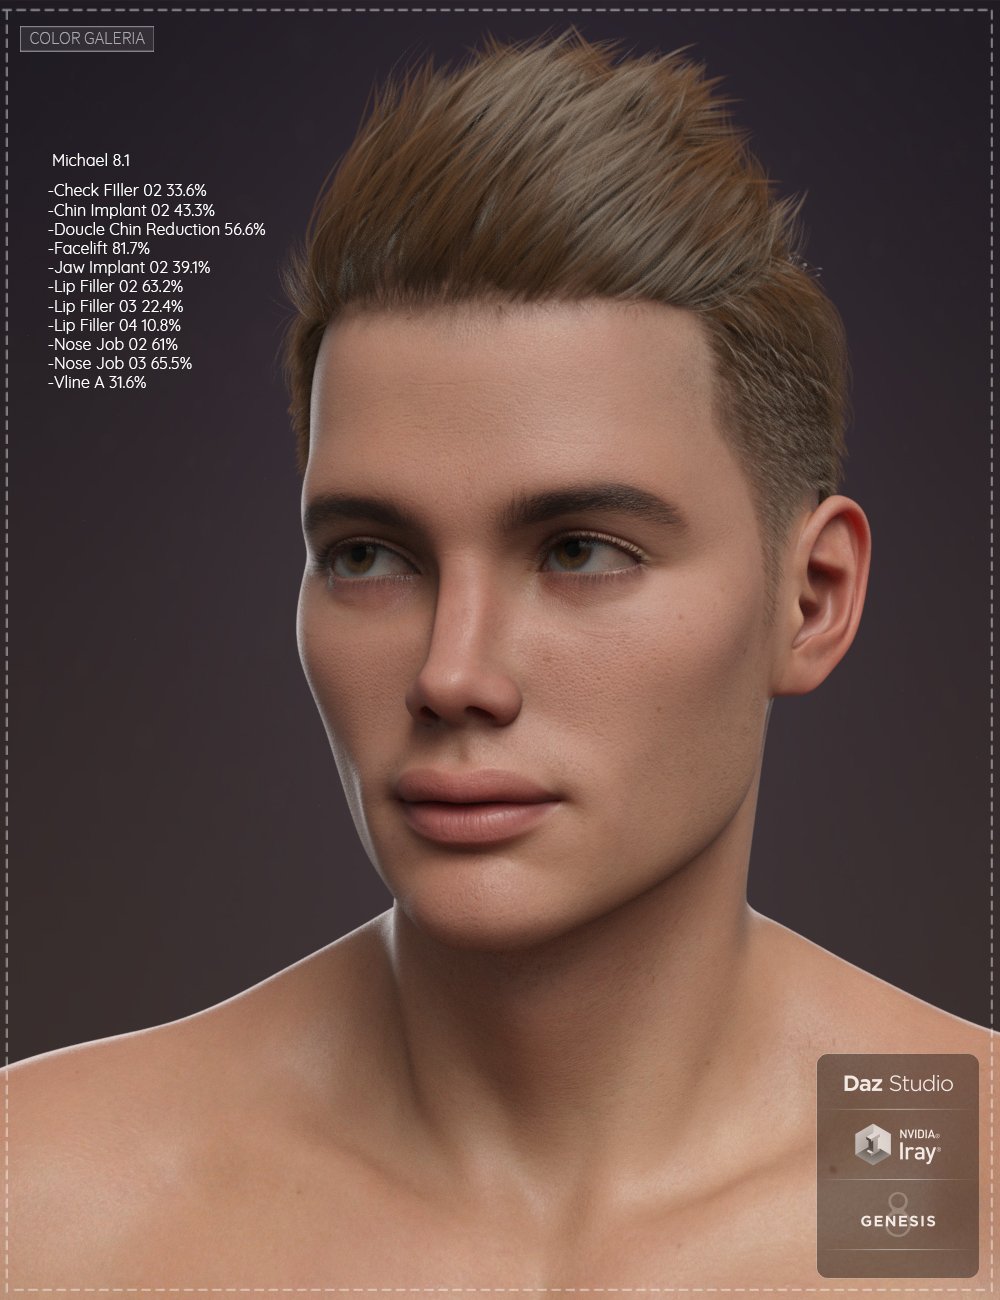 Retouch Face Morphs for Genesis 8 Males by: Color Galeria, 3D Models by Daz 3D